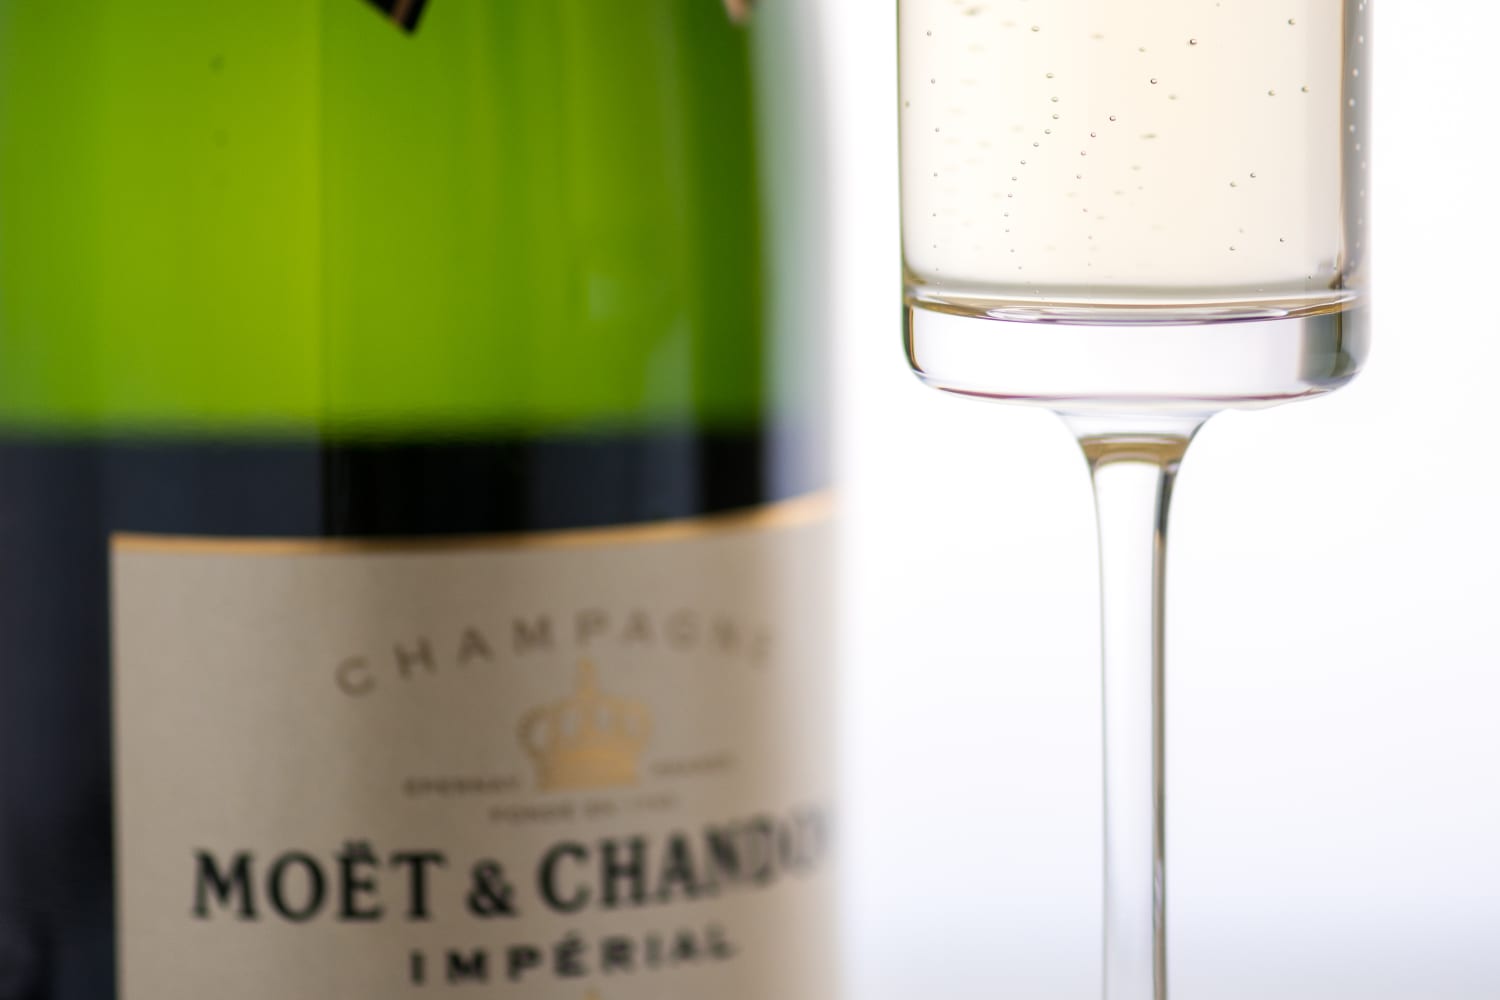 How Long Does Champagne Last After Opening?